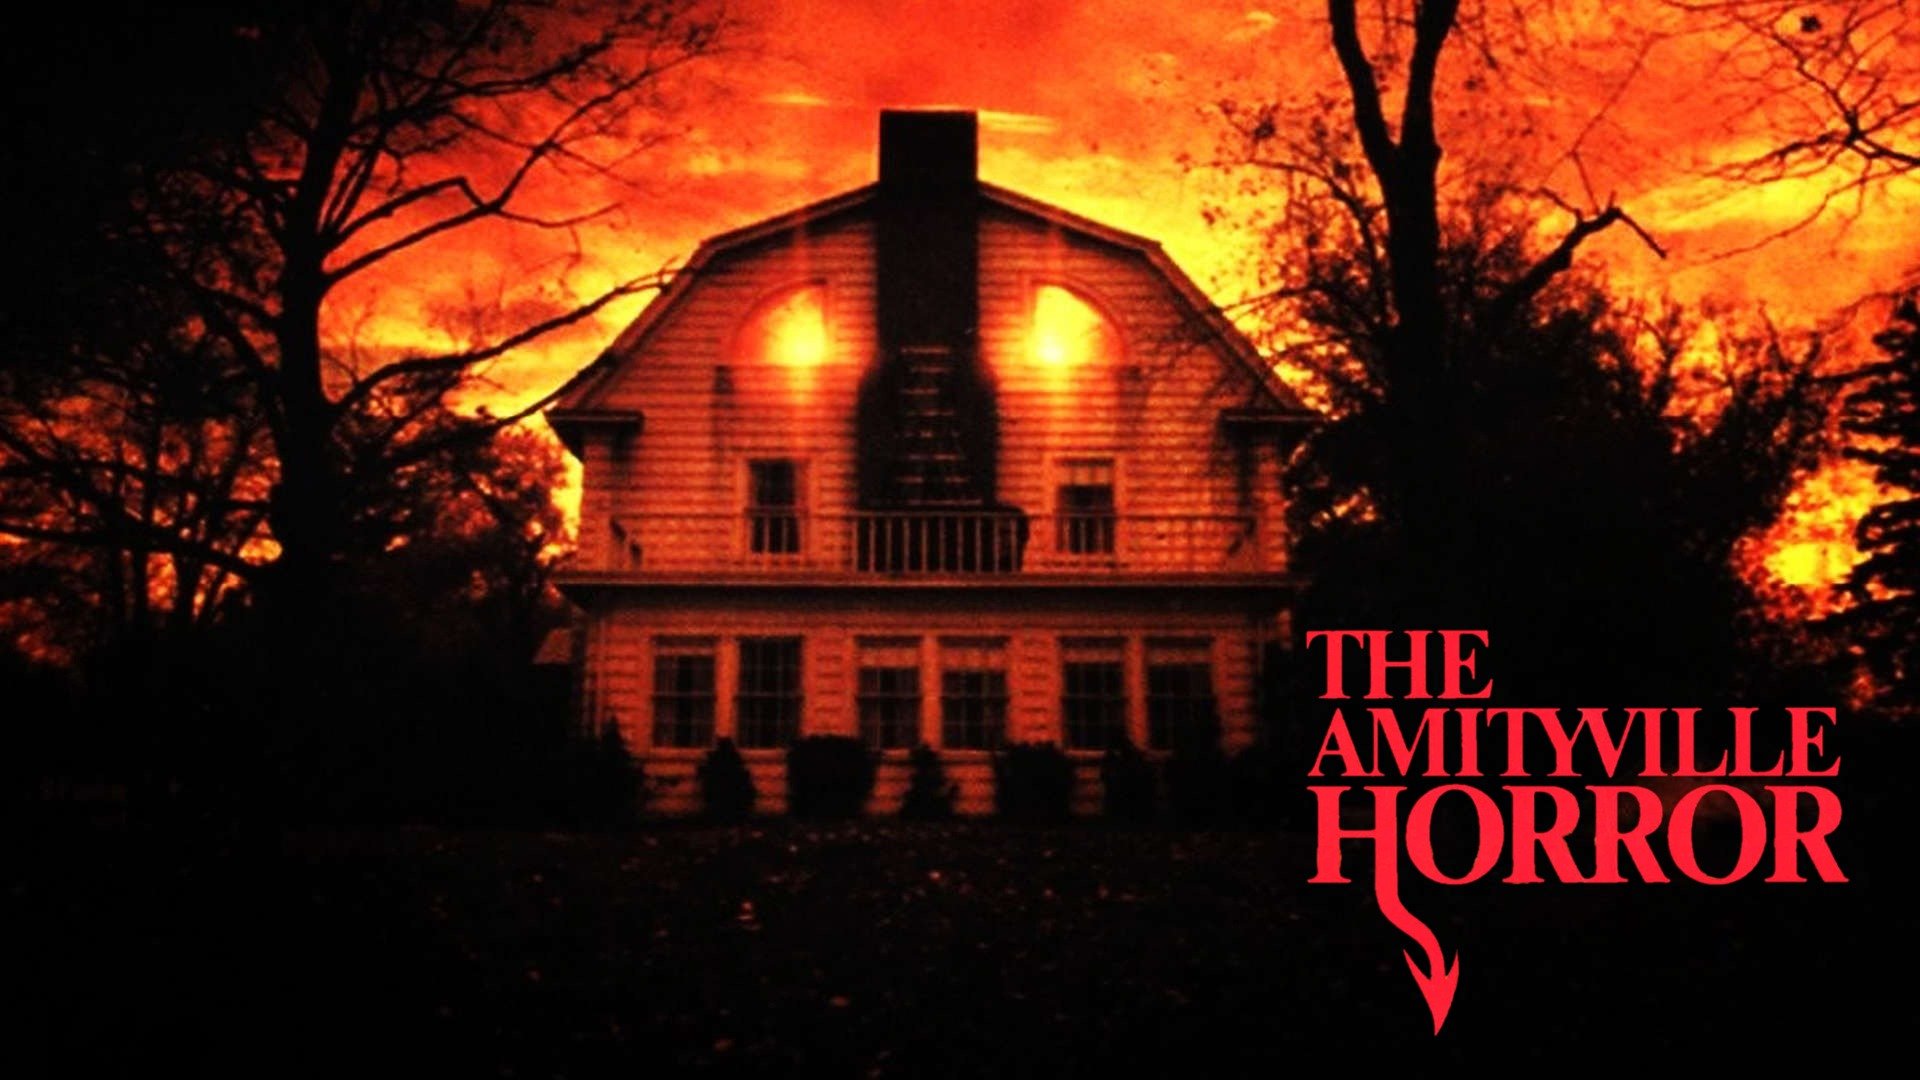 THE AMITYVILLE HORROR (1979) | Official Trailer | MGM Studios - YouTube